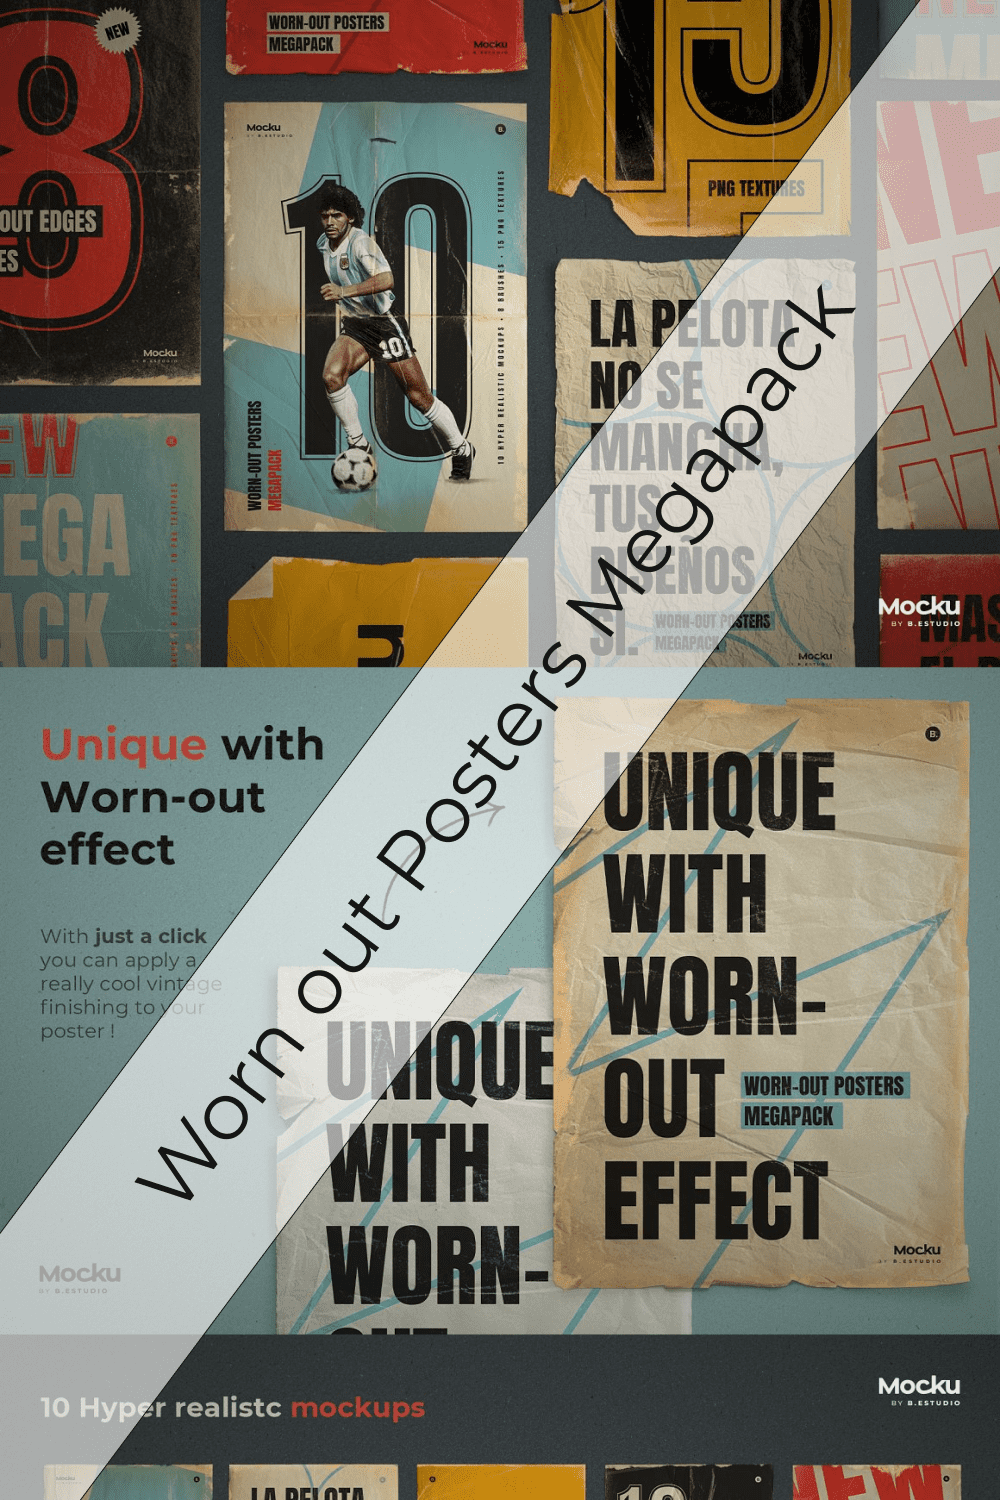 Worn out Posters Megapack Pinterest image.